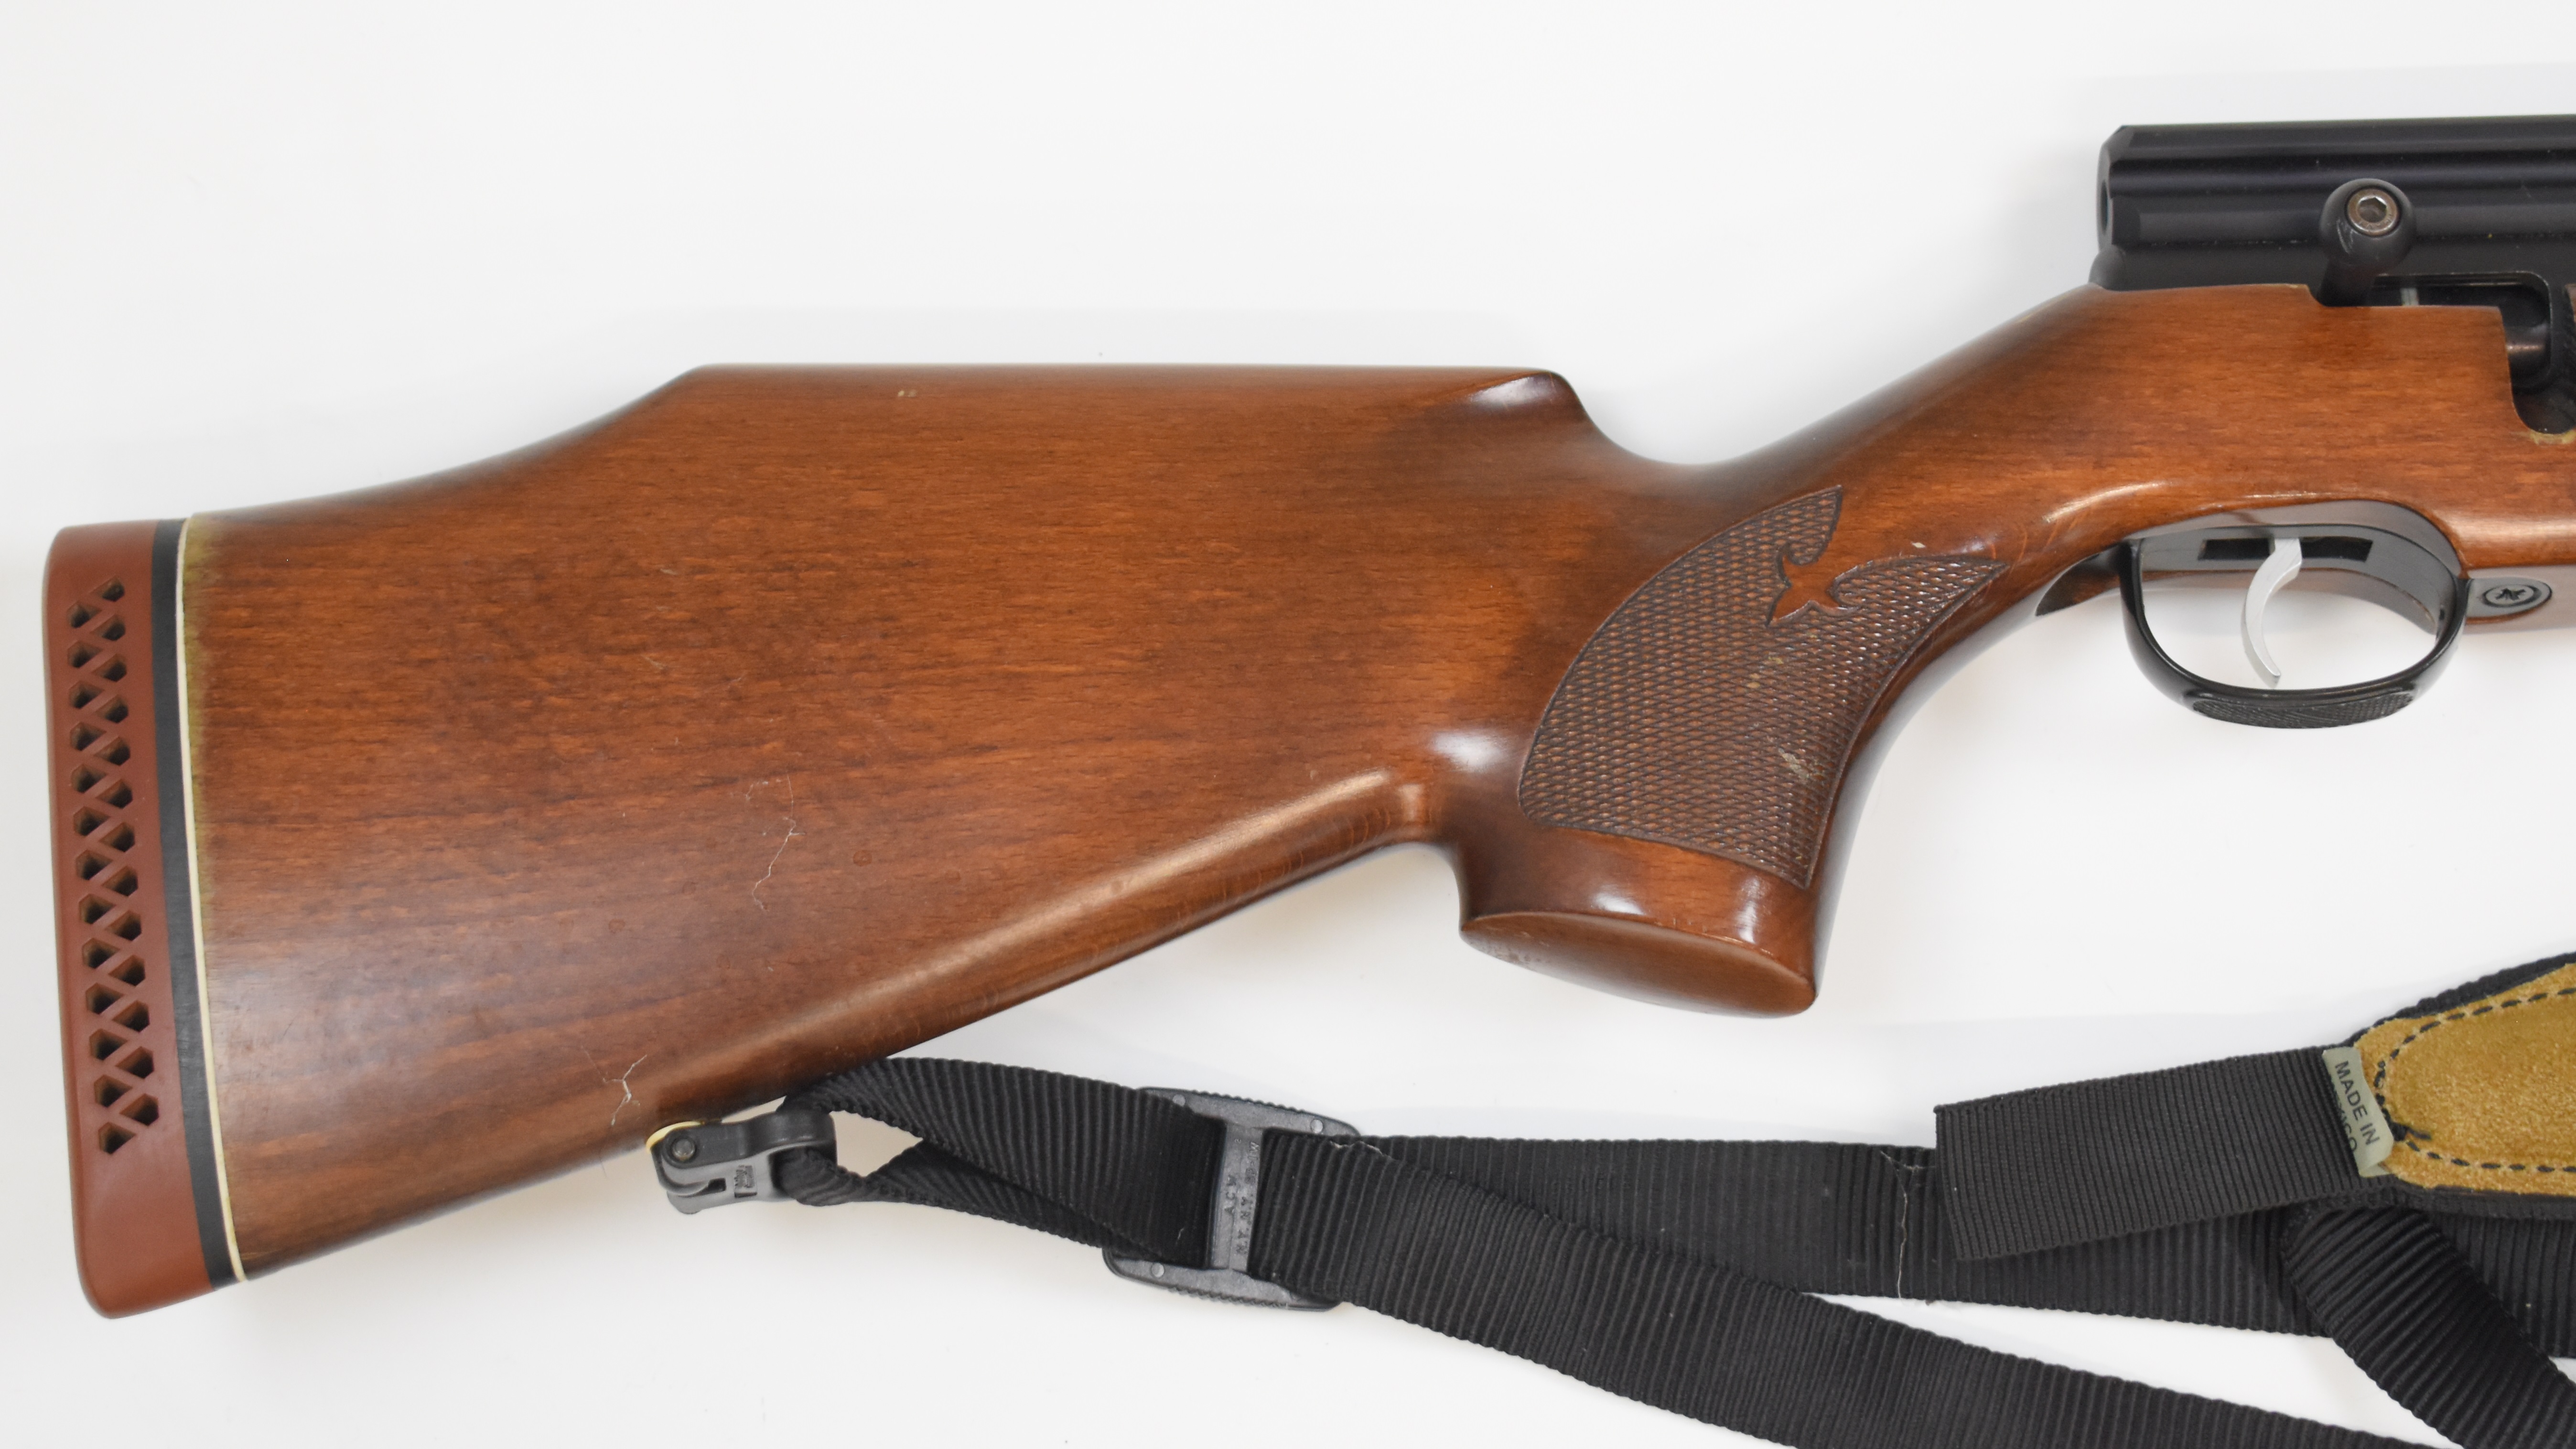 Webley Axsor .22 PCP air rifle with chequered semi-pistol grip and forend, raised cheek piece, - Image 13 of 20